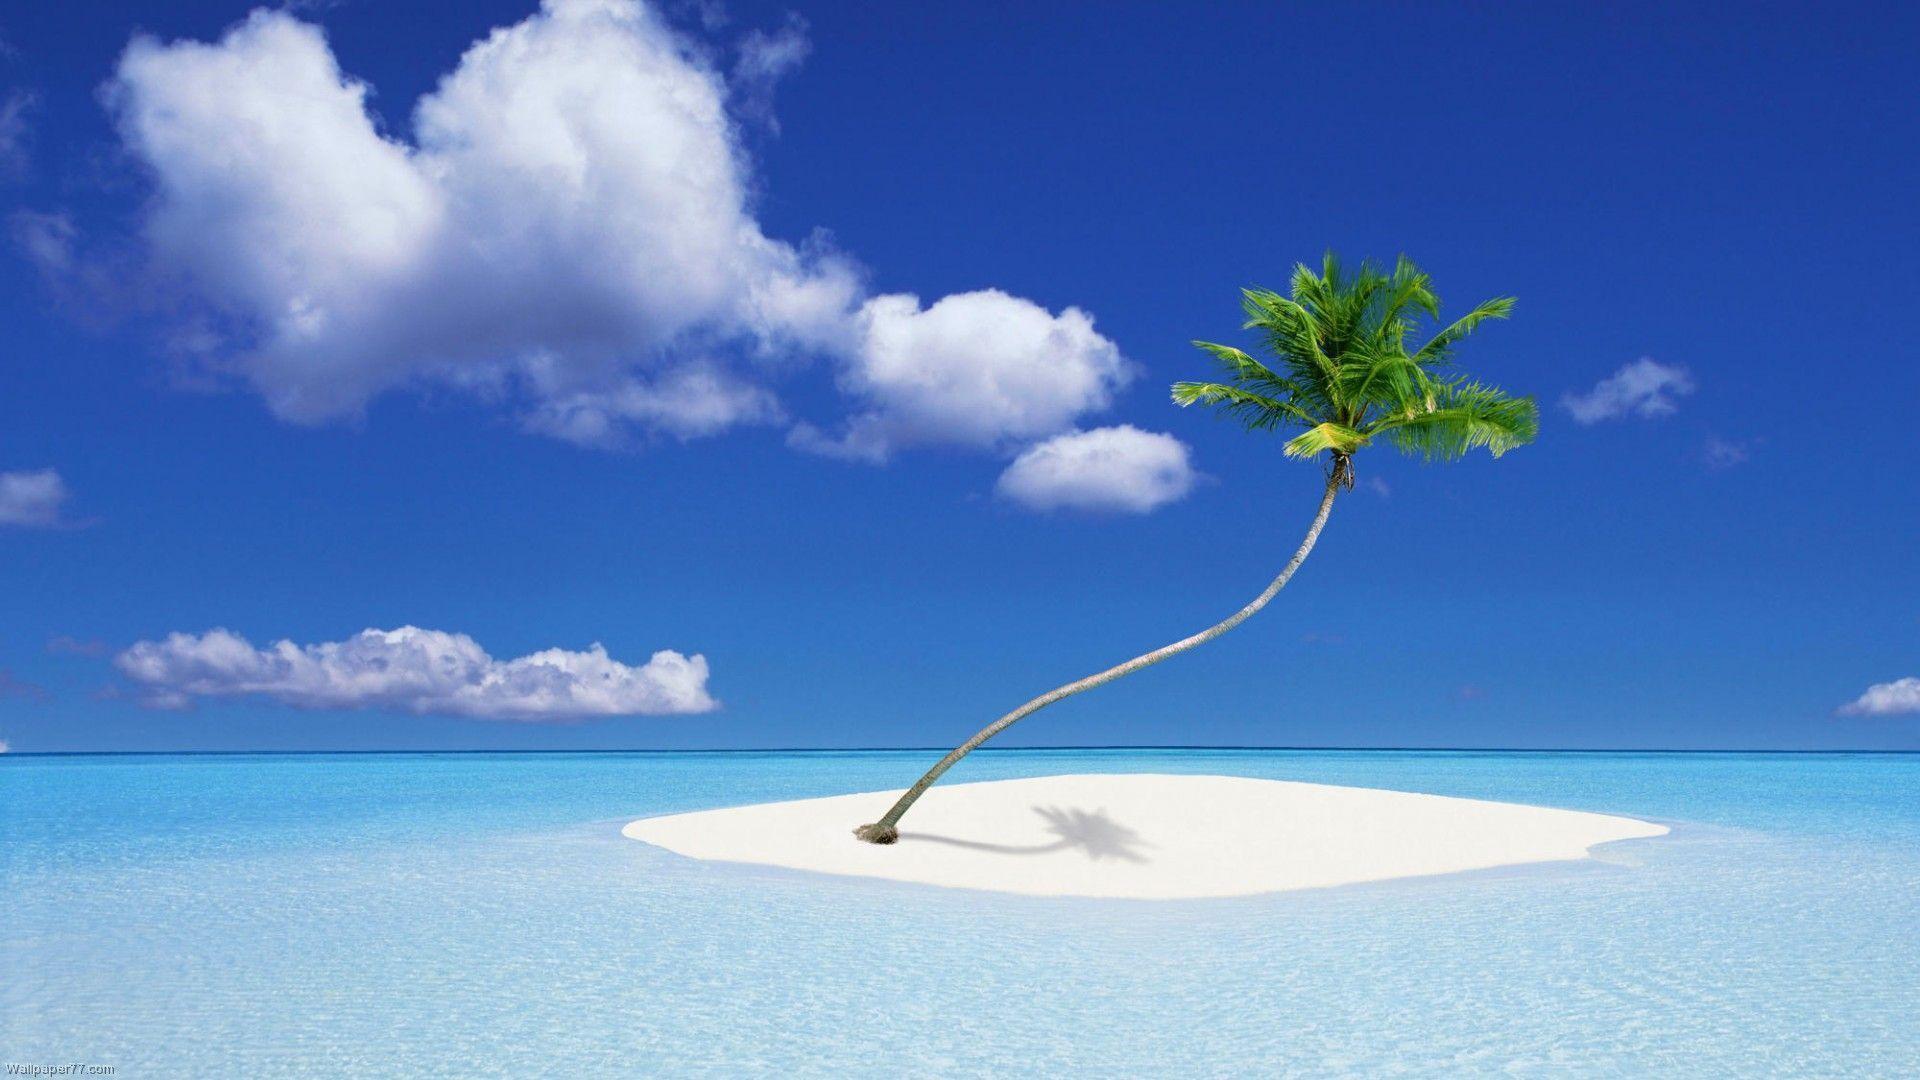 Lonely Palm Landscape Beach Wallpaper 1920x1080 px Free Download